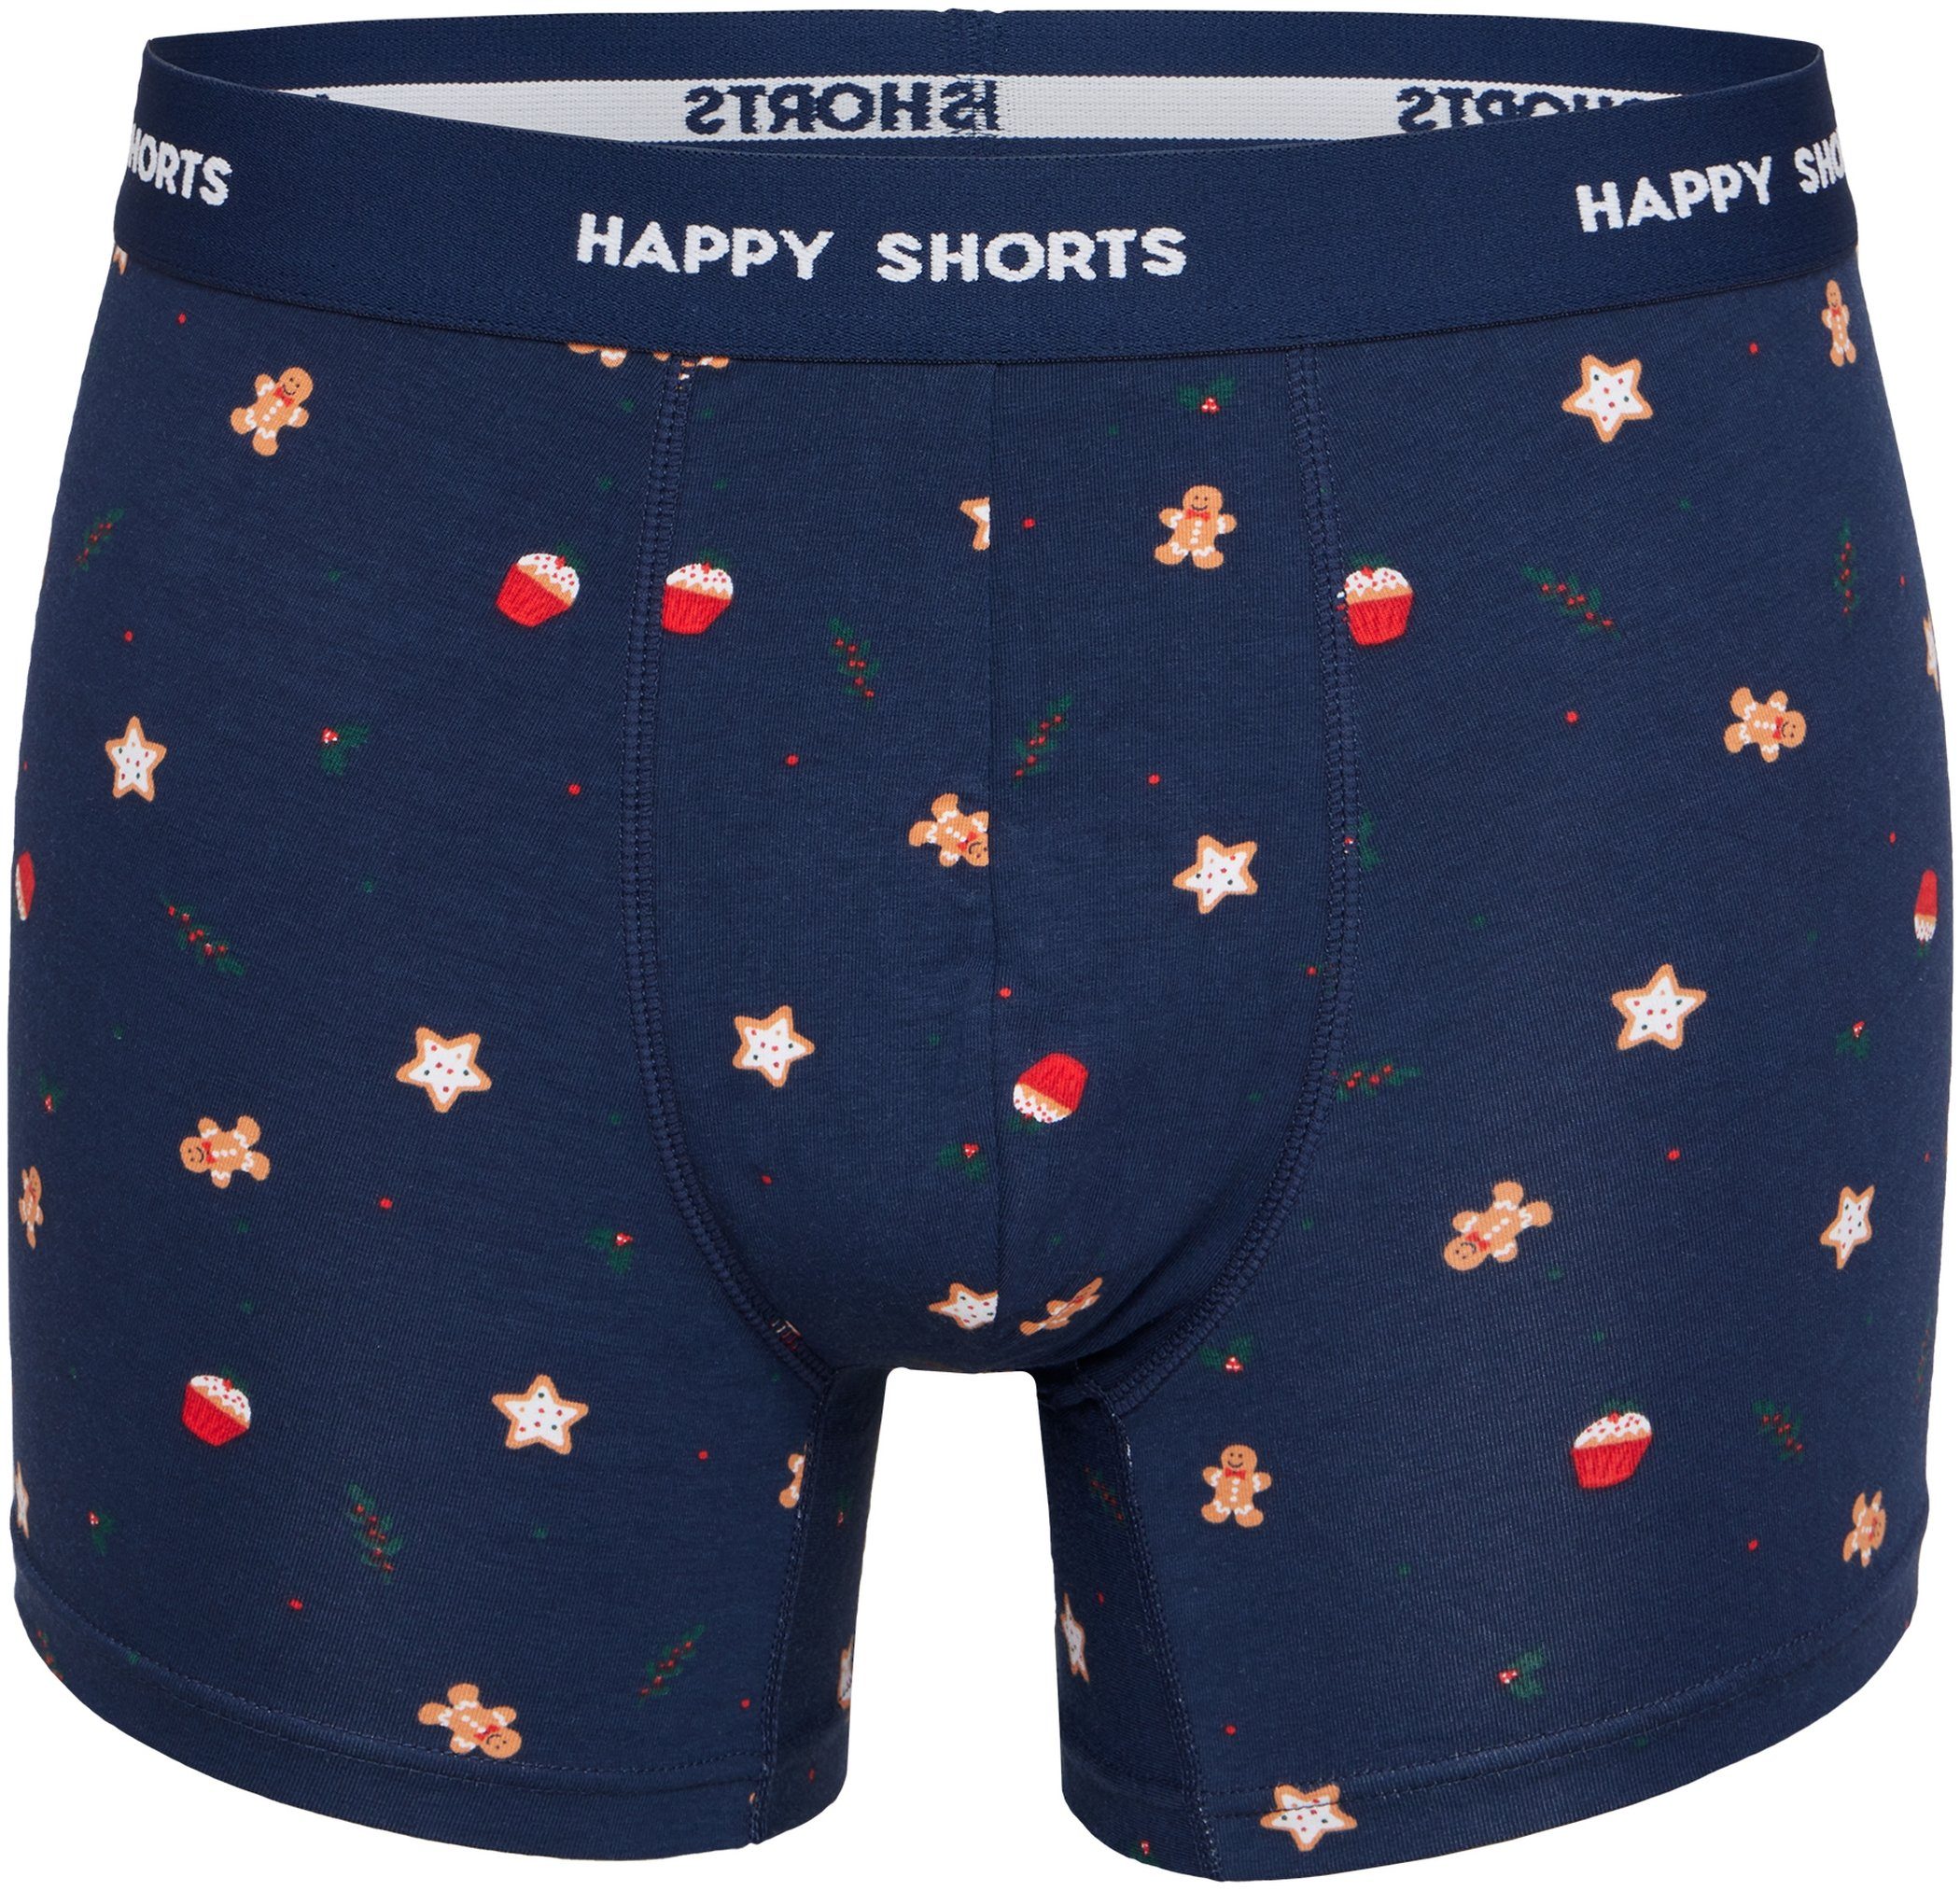 HAPPY SHORTS Trunk 2er Boxershorts (1-St) Cookies Jersey Pant Weihnachten SHORTS HAPPY Pack